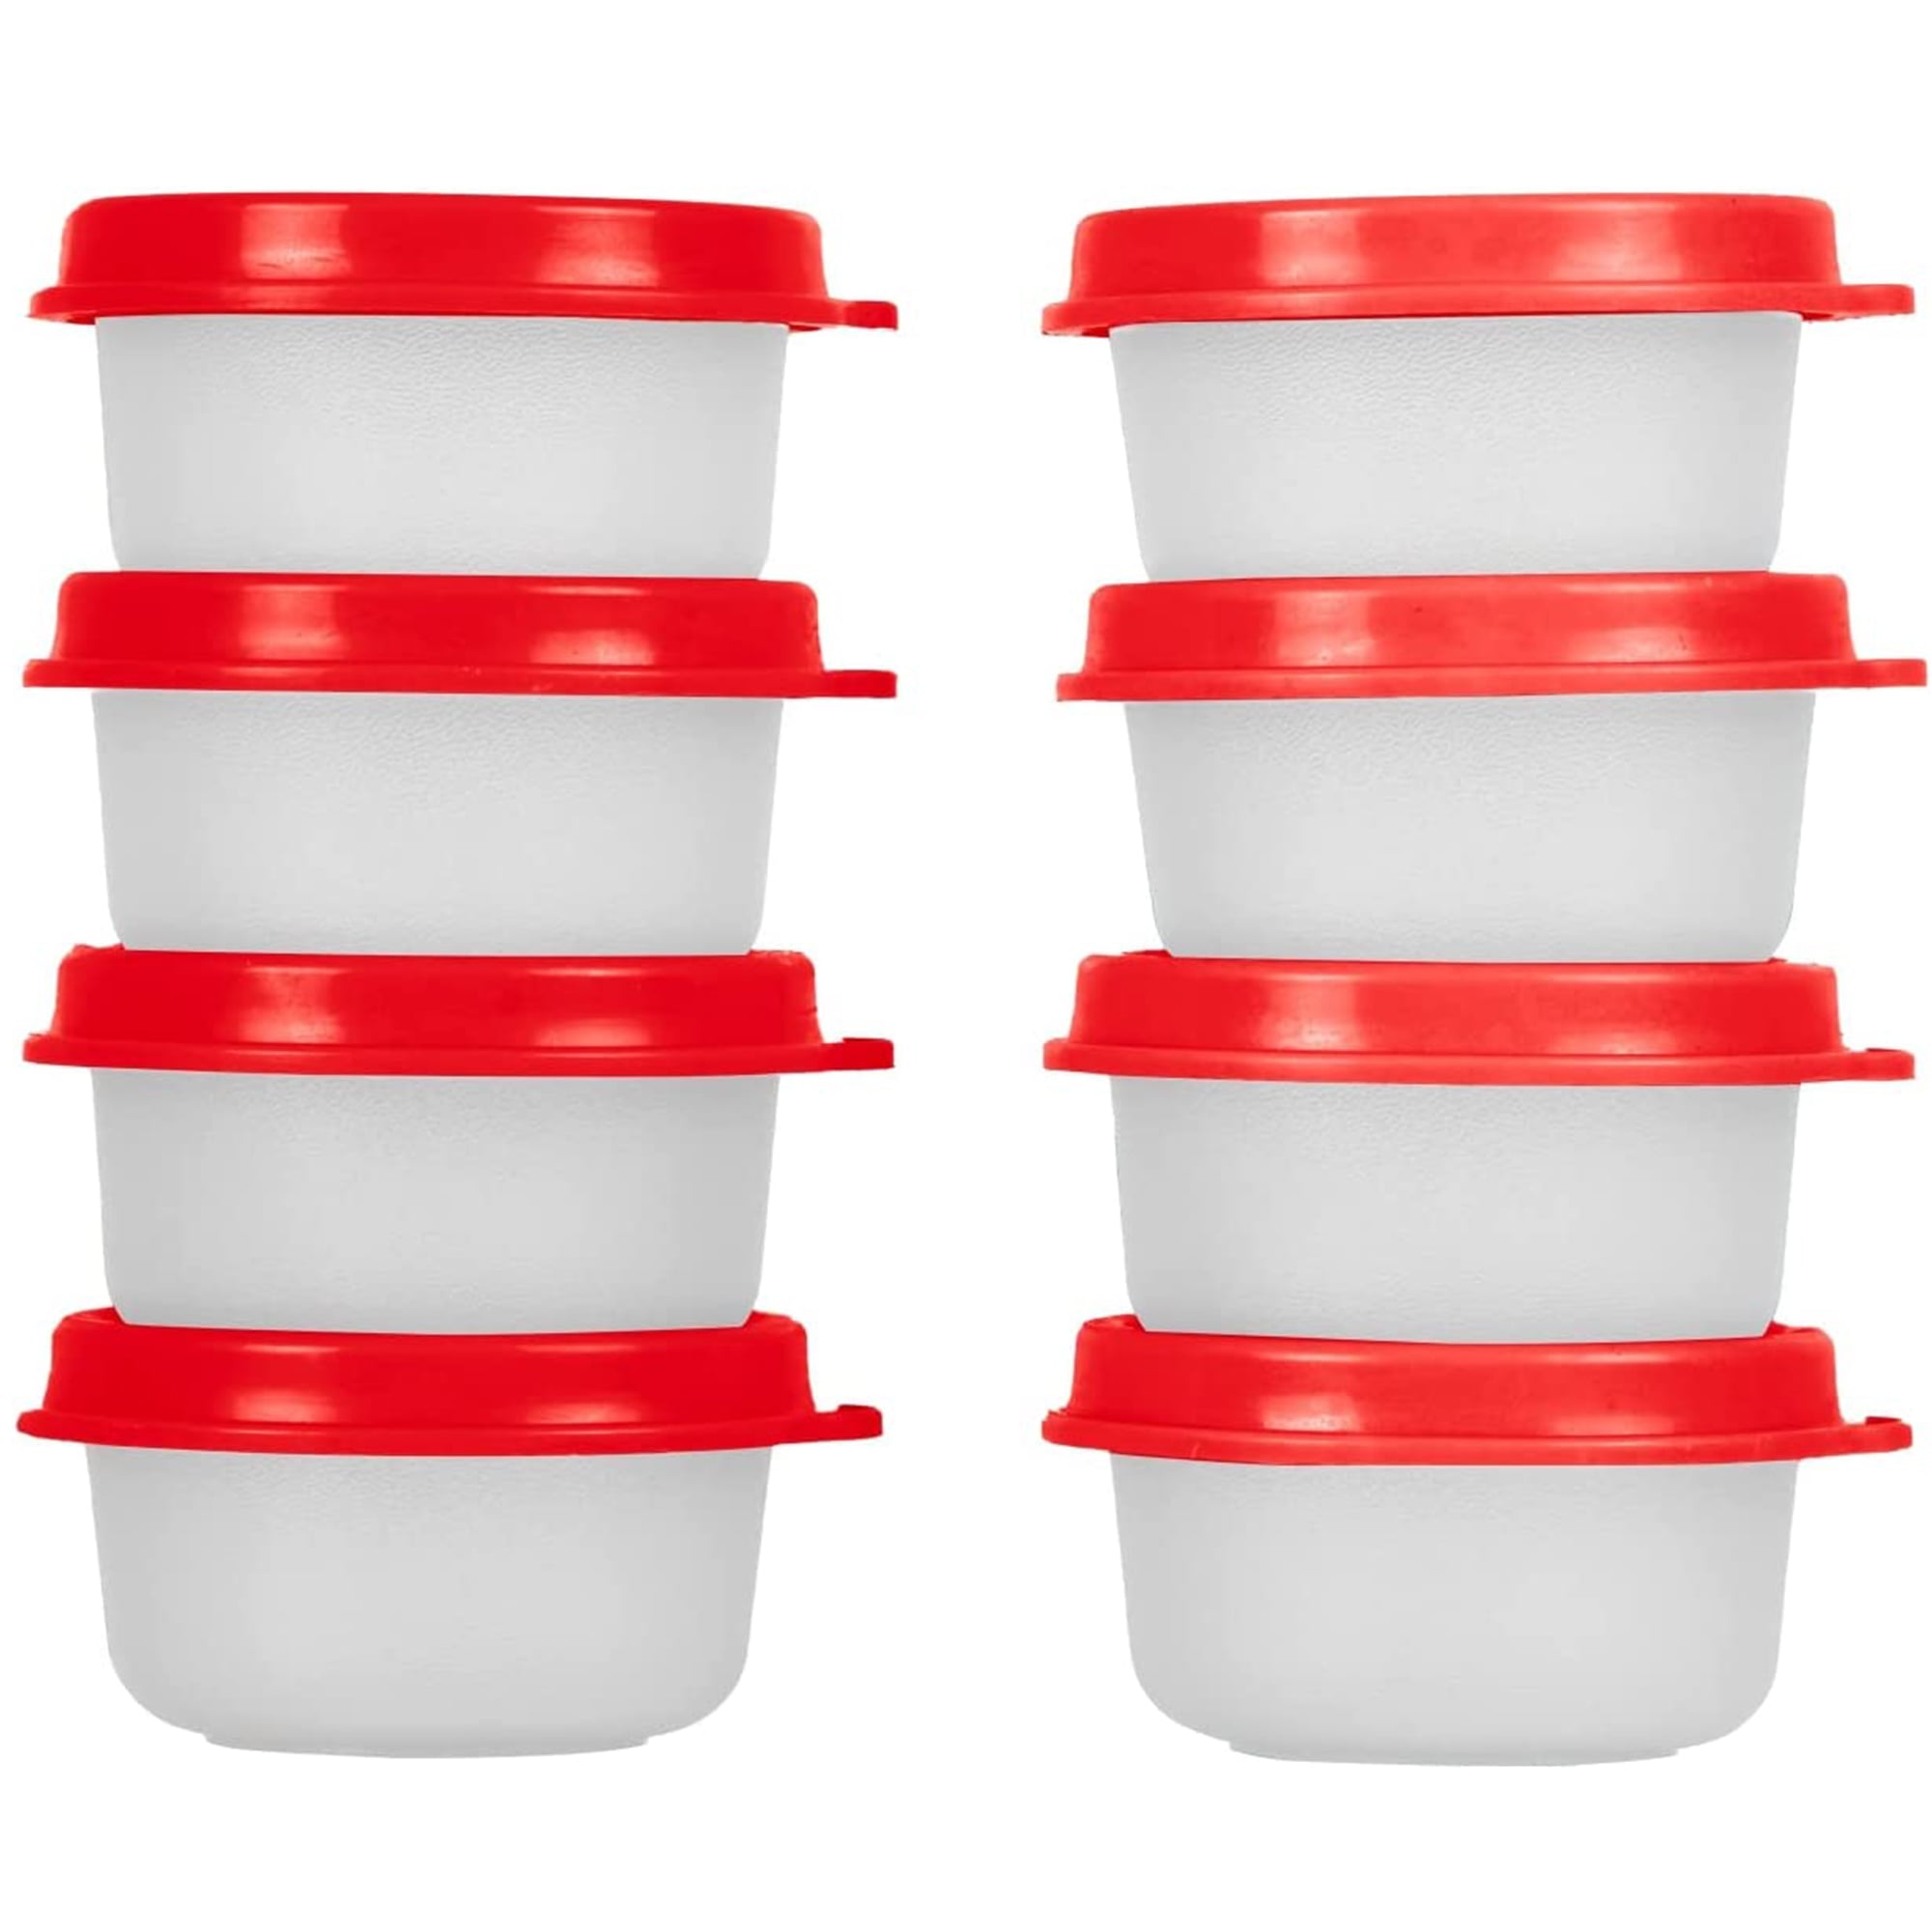 Freshmage Condiment Containers with Lids, 6 Pack 2.7 oz Reusable